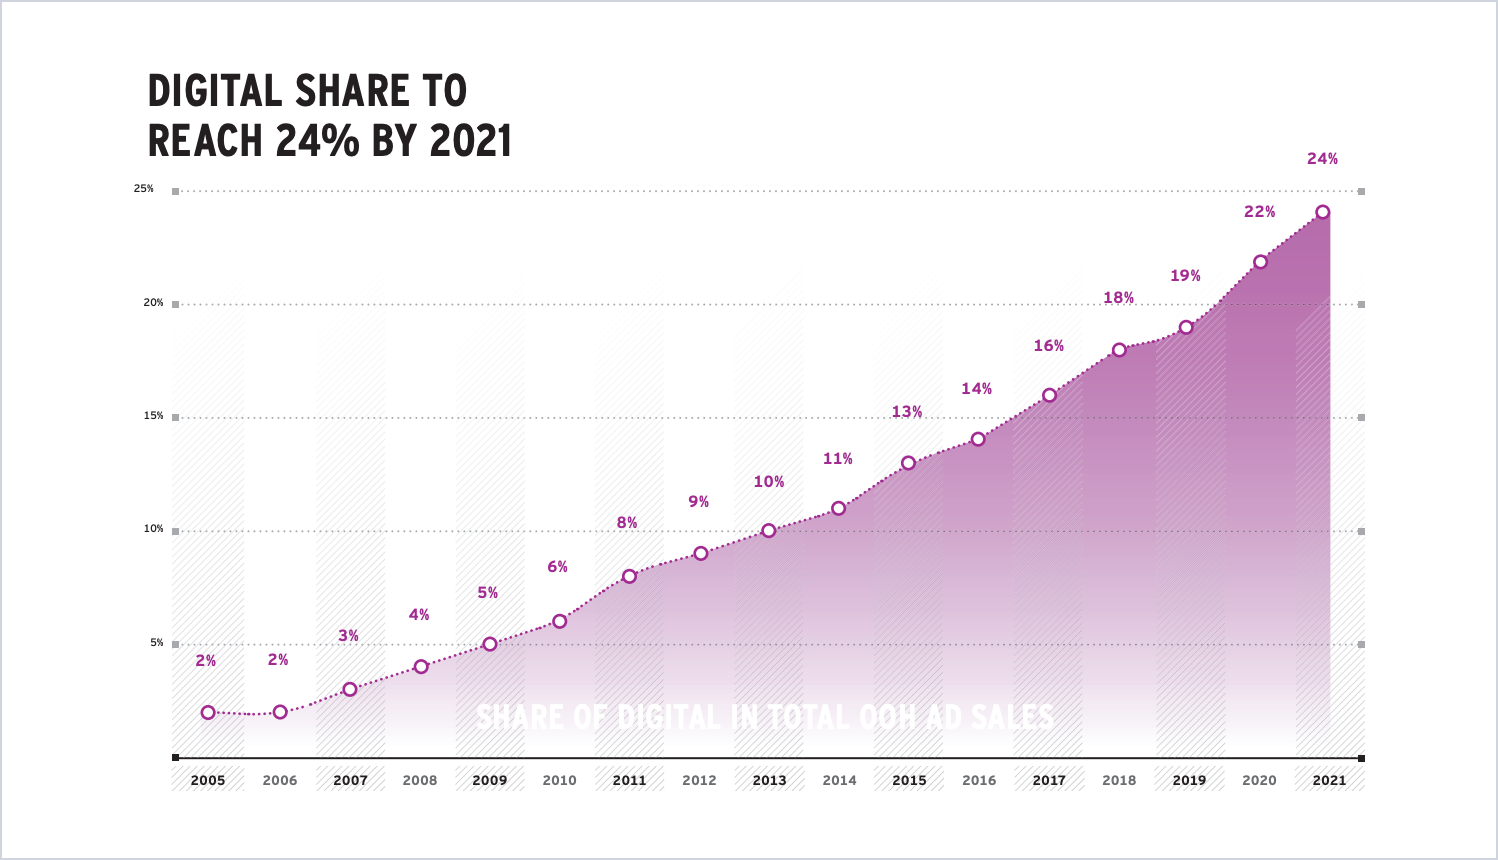 Digital share to reach 24% by 2021